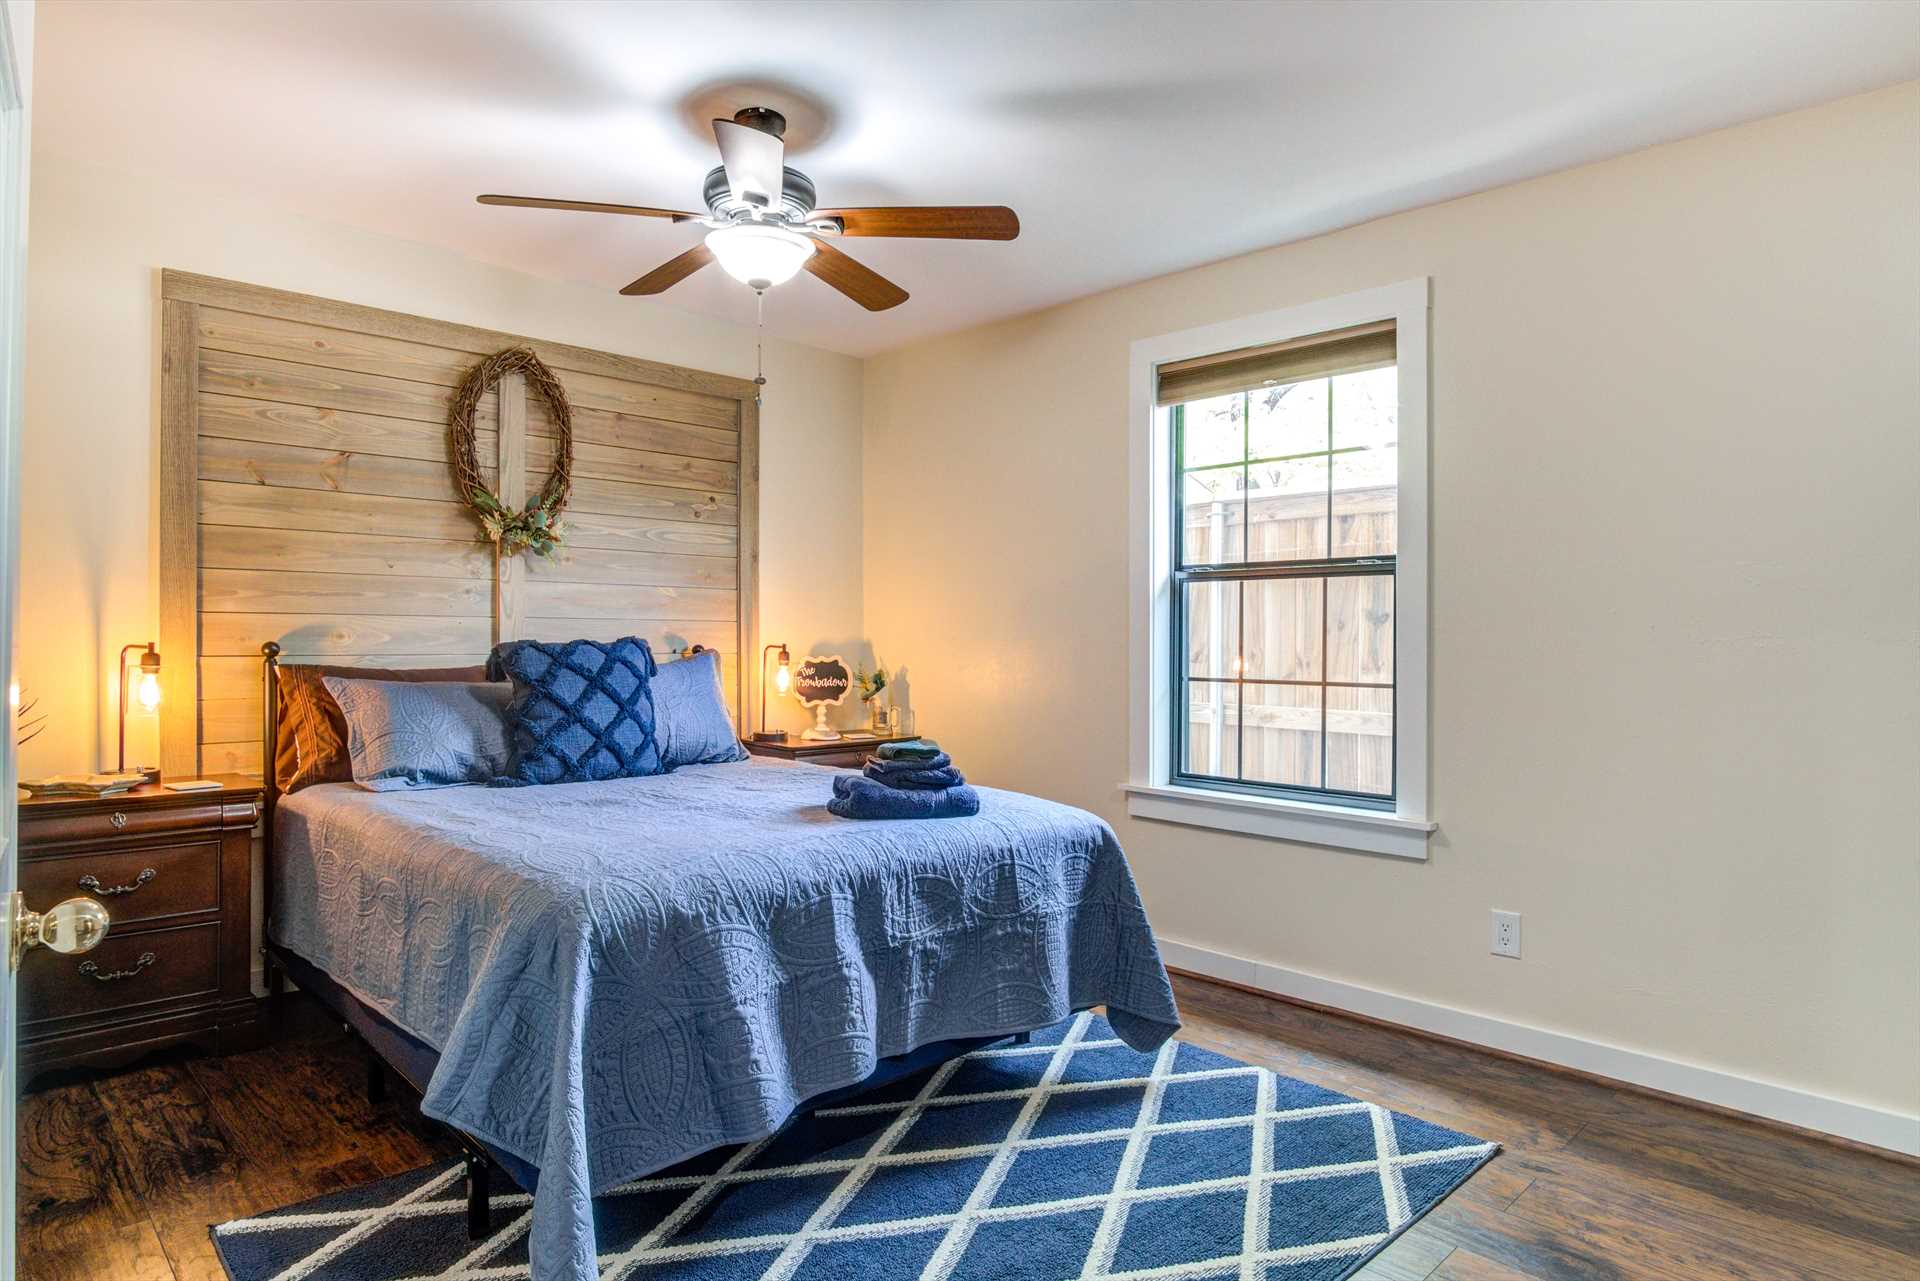                                                 A queen-sized bed graces the third bedroom at Cypress Star, and all bedding here comes complete with fresh linens.